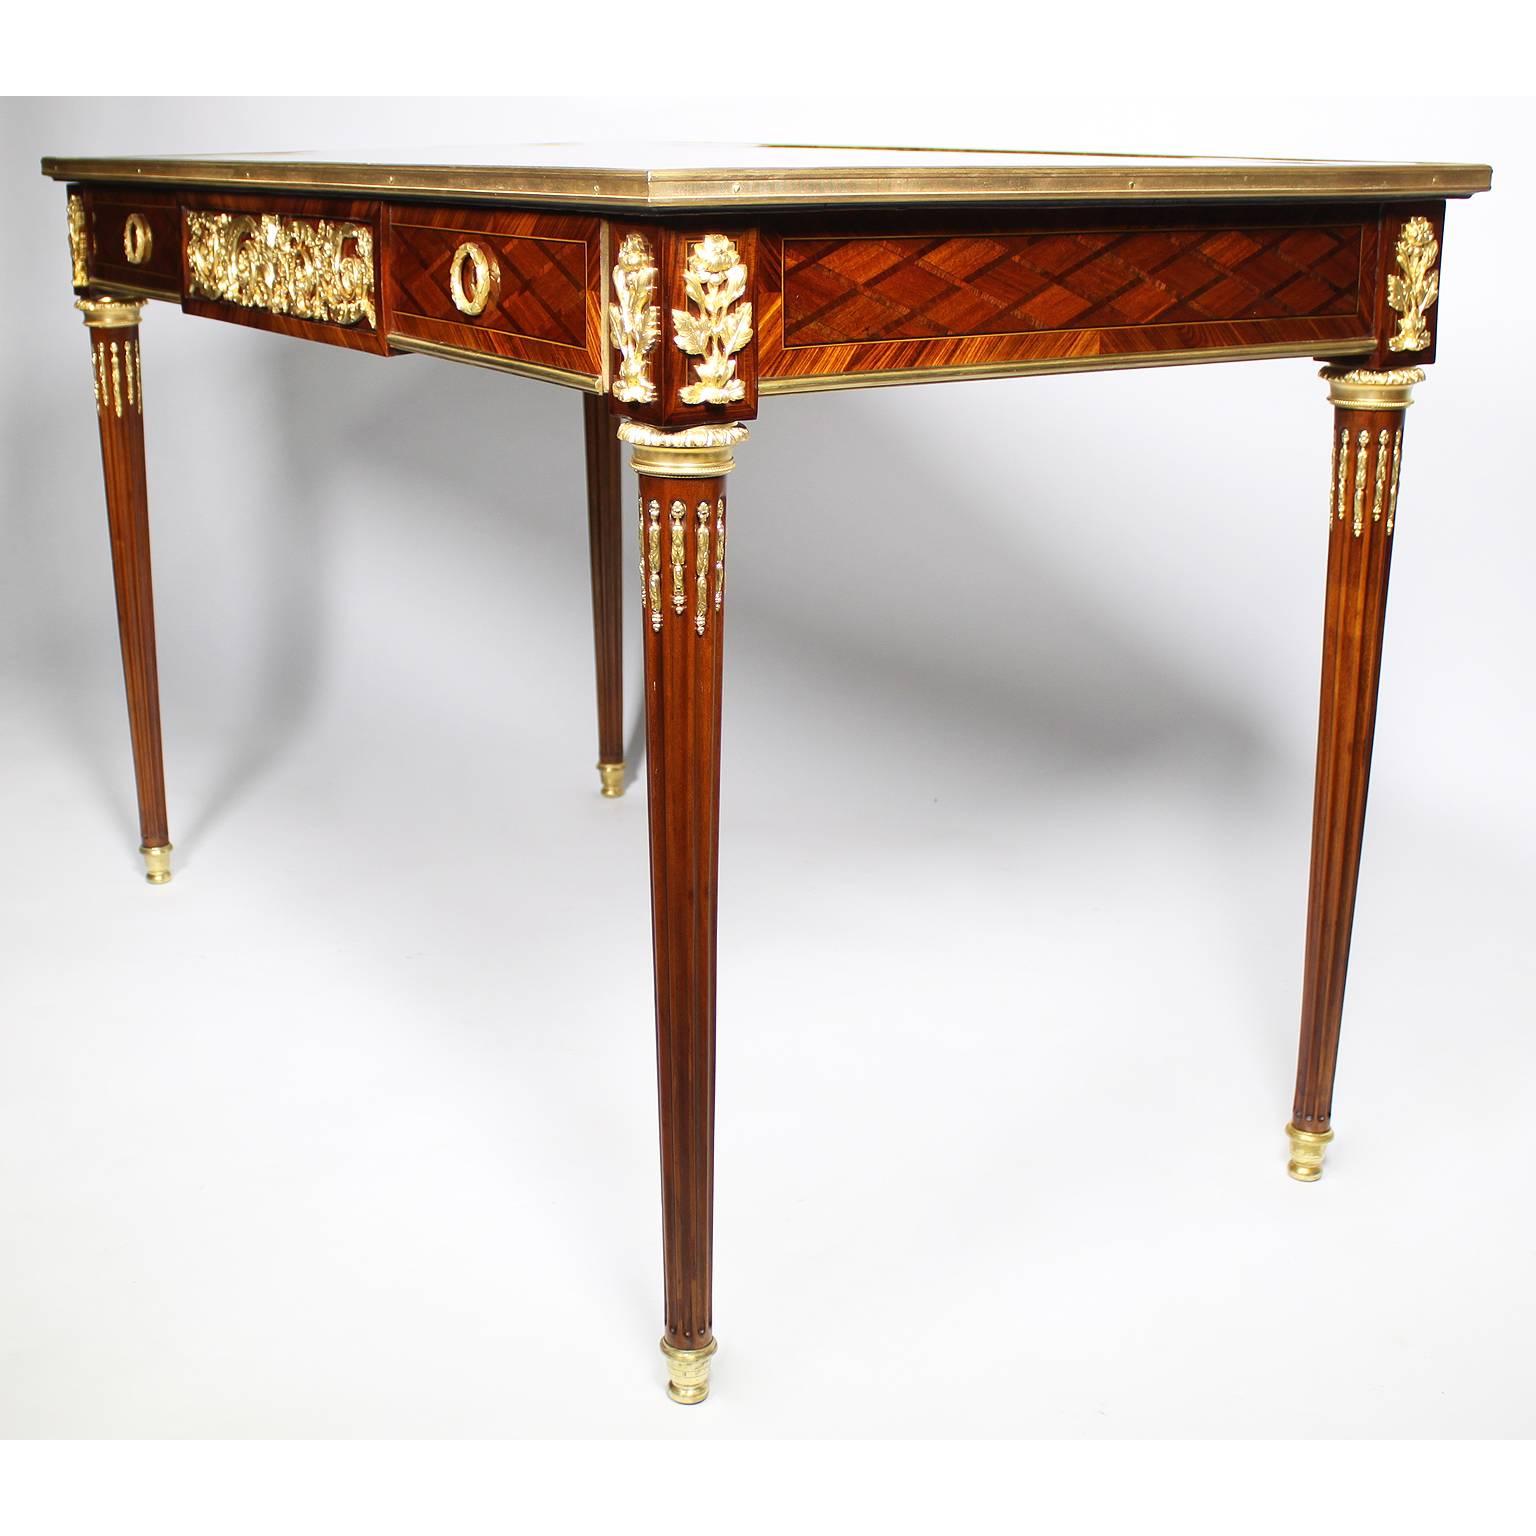 French Louis XVI Style Kingwood Parquetry & Ormolu Mounted Ladies Writing Table In Good Condition For Sale In Los Angeles, CA